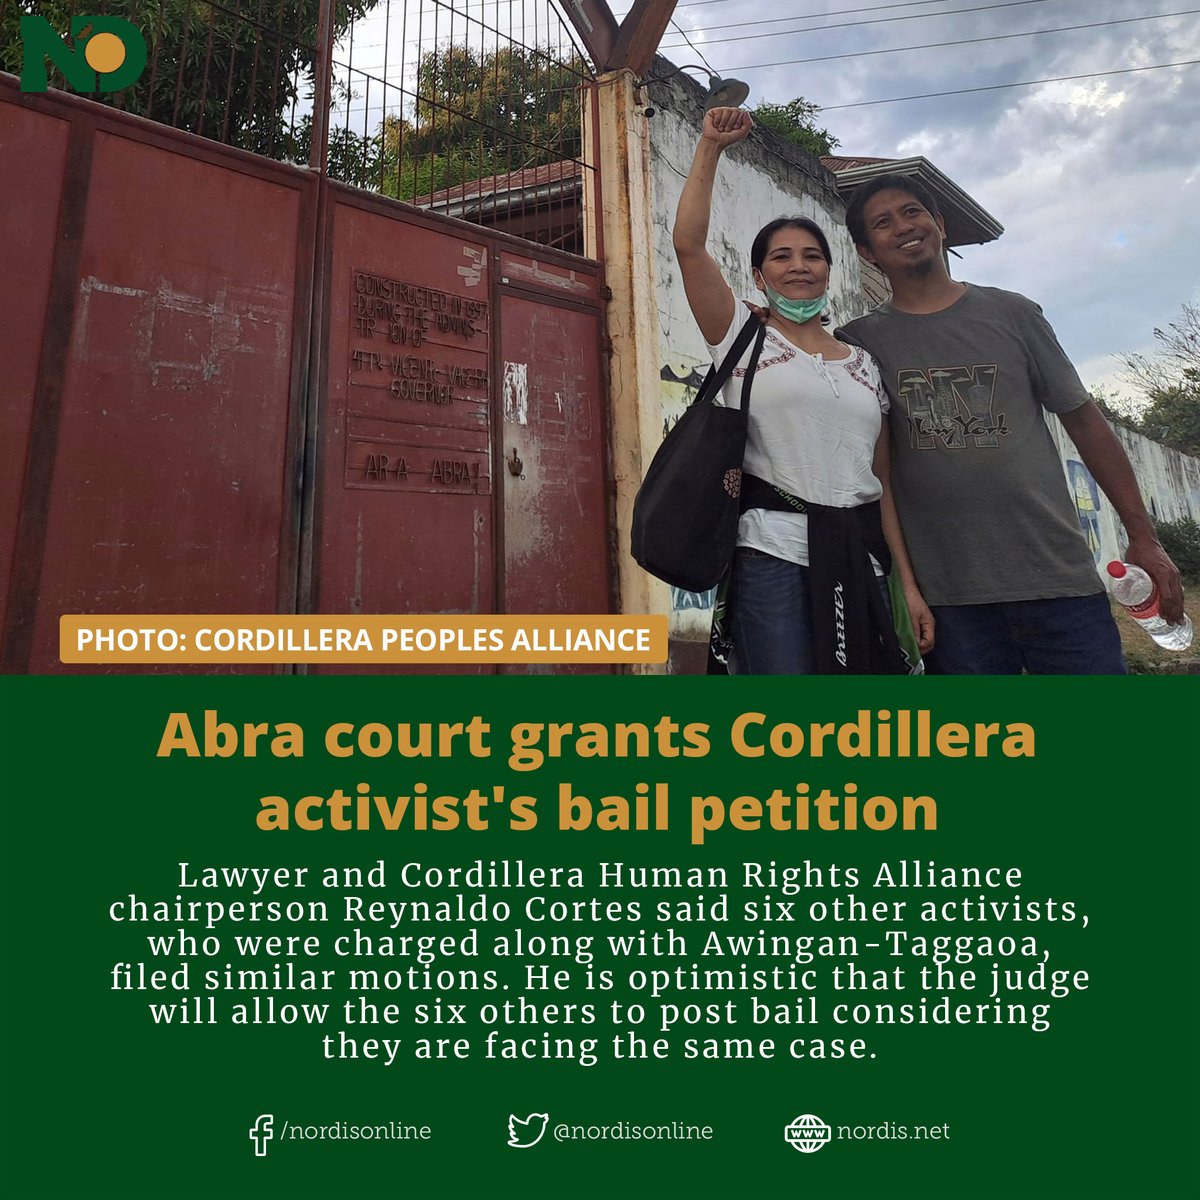 NEWS | After more than a week of detention at the Abra Provincial Jail, Cordillera activist Jennifer Awingan-Taggaoa gained her temporary freedom on January 7 after her family and colleagues raised the P100,000 bail set by the court. Read: tinyurl.com/y466xwhm